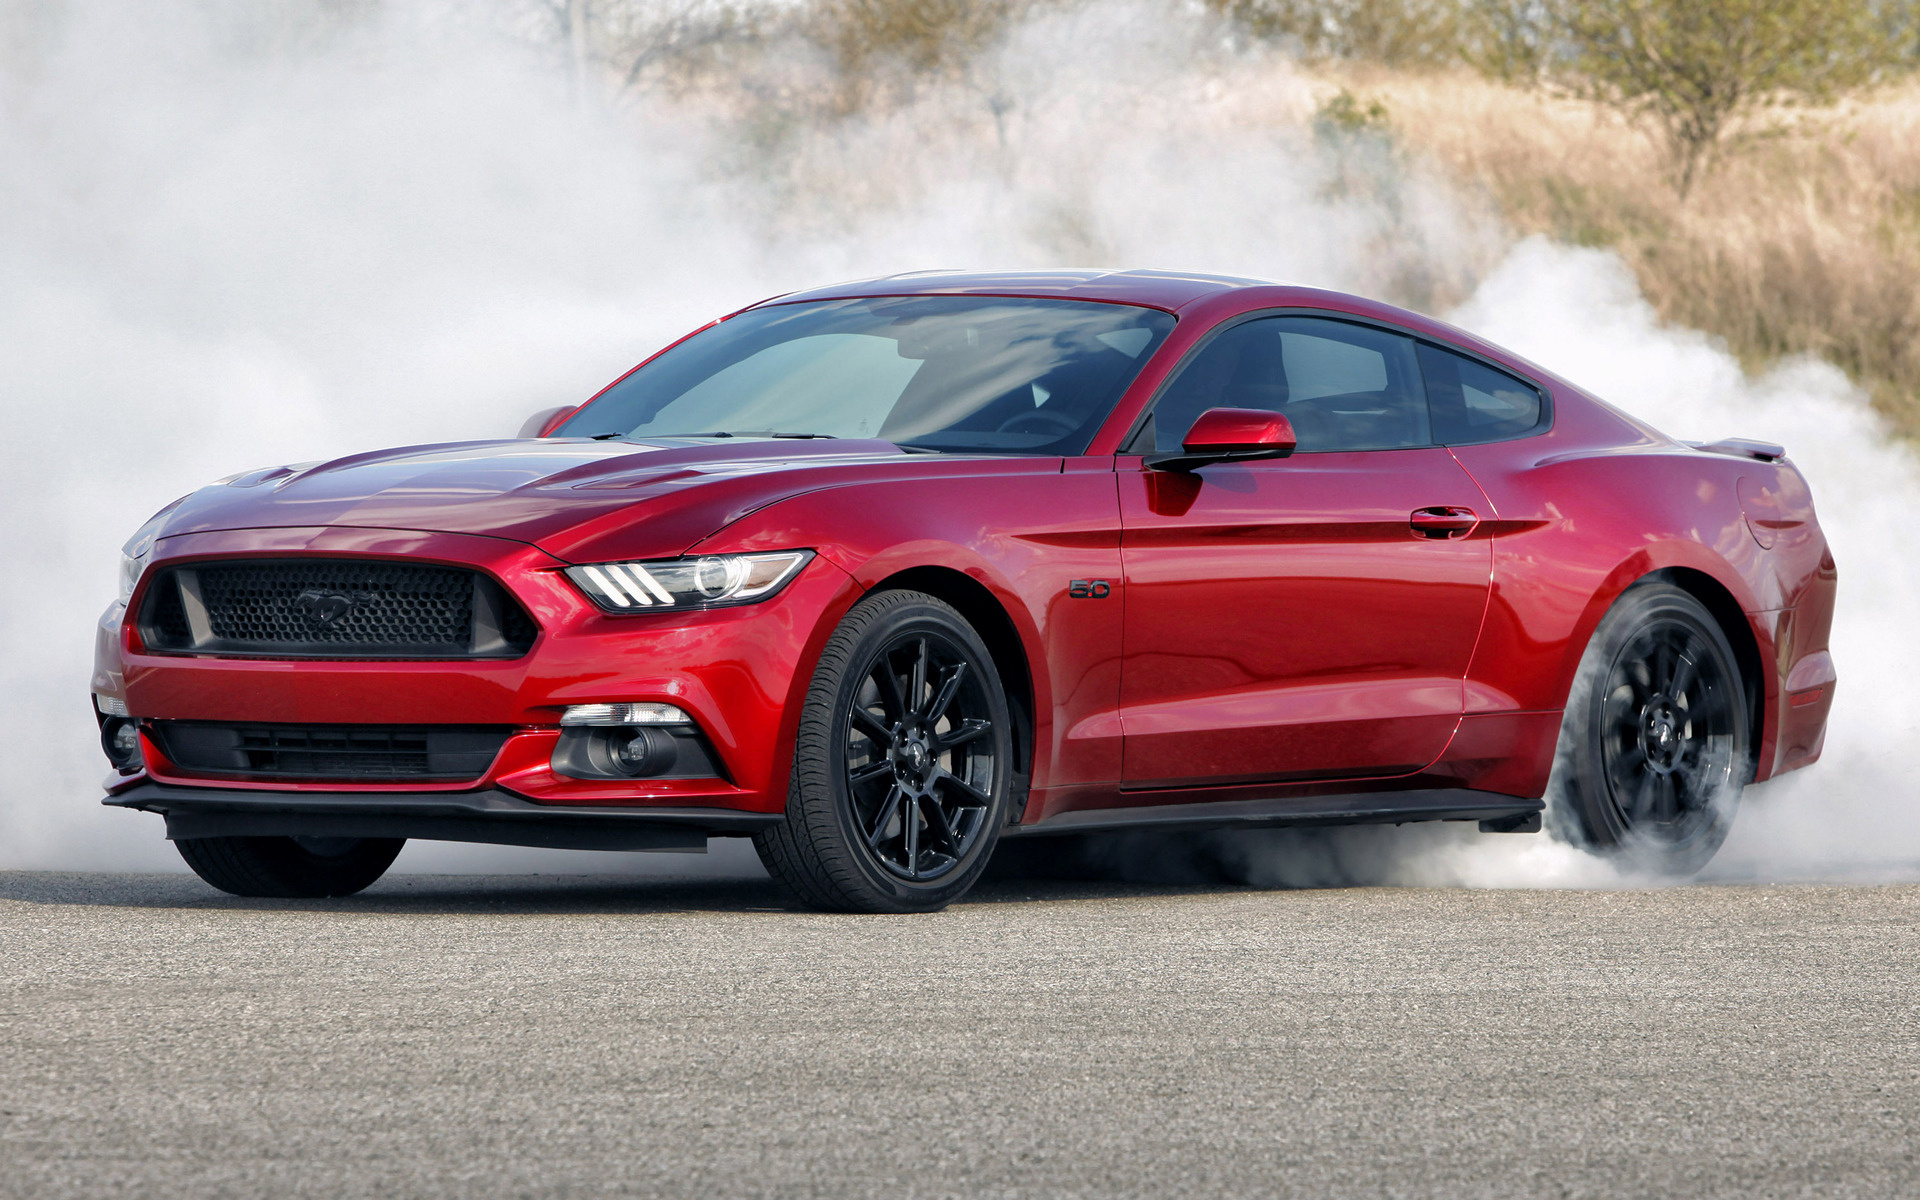 34+ Ruby Red Mustang Color Hd Wallpaper full HD